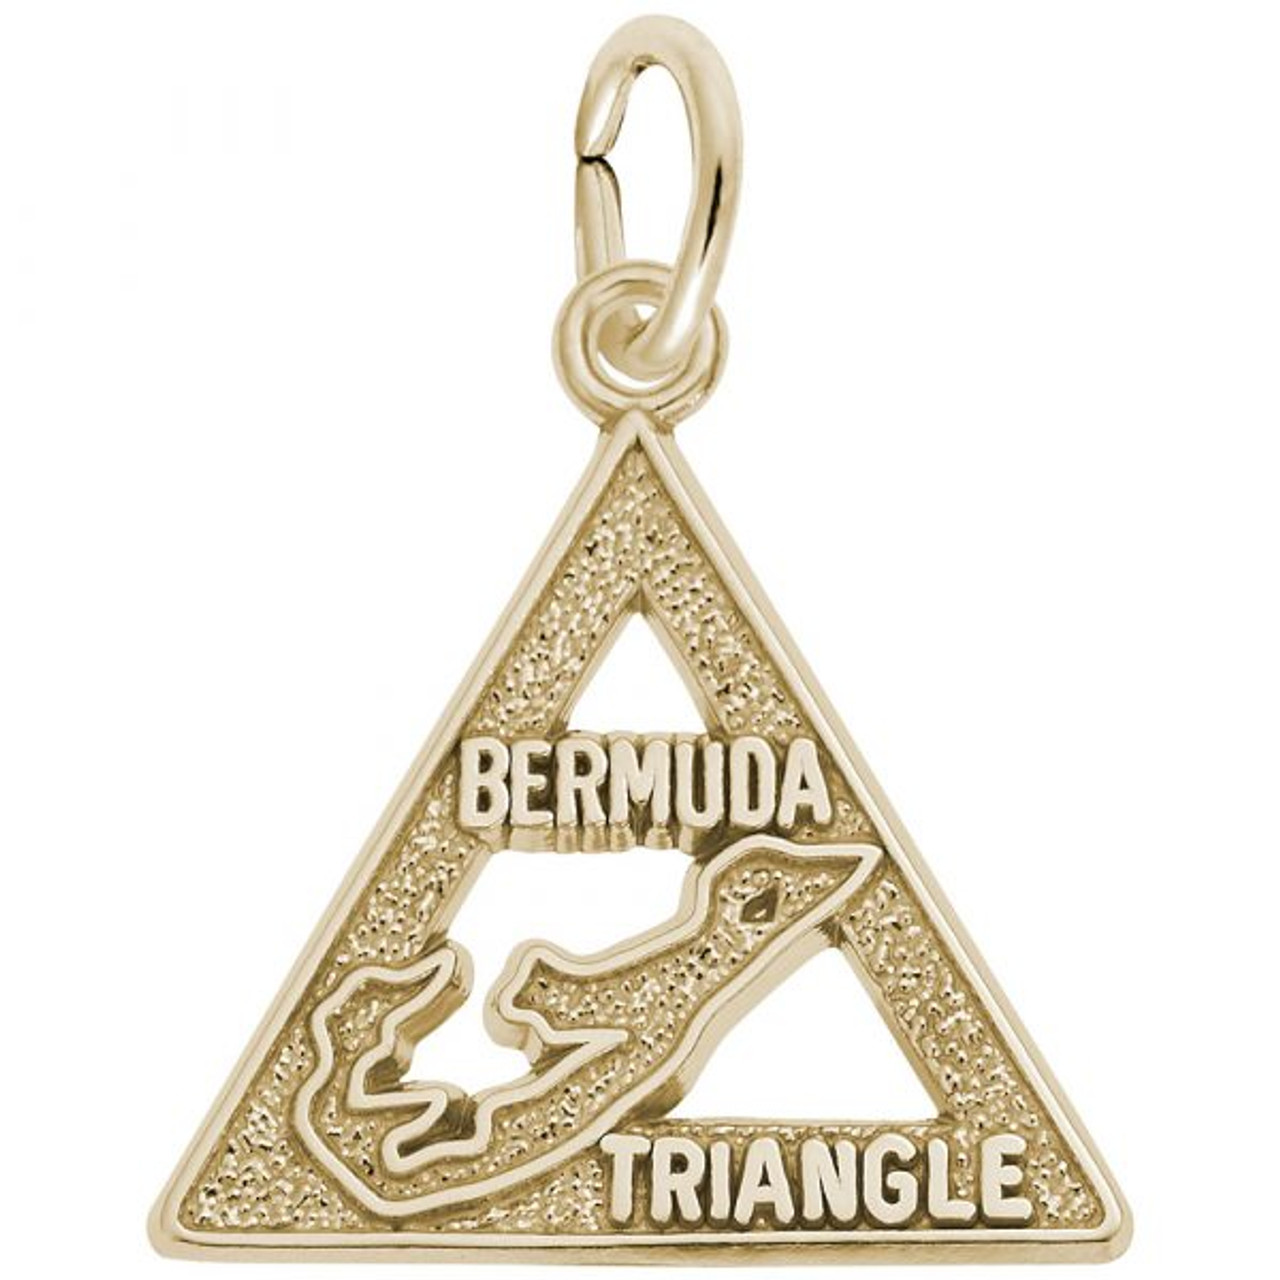 Bermuda Triangle Gold Charm - Gold Plate, 10k Gold, 14k Gold